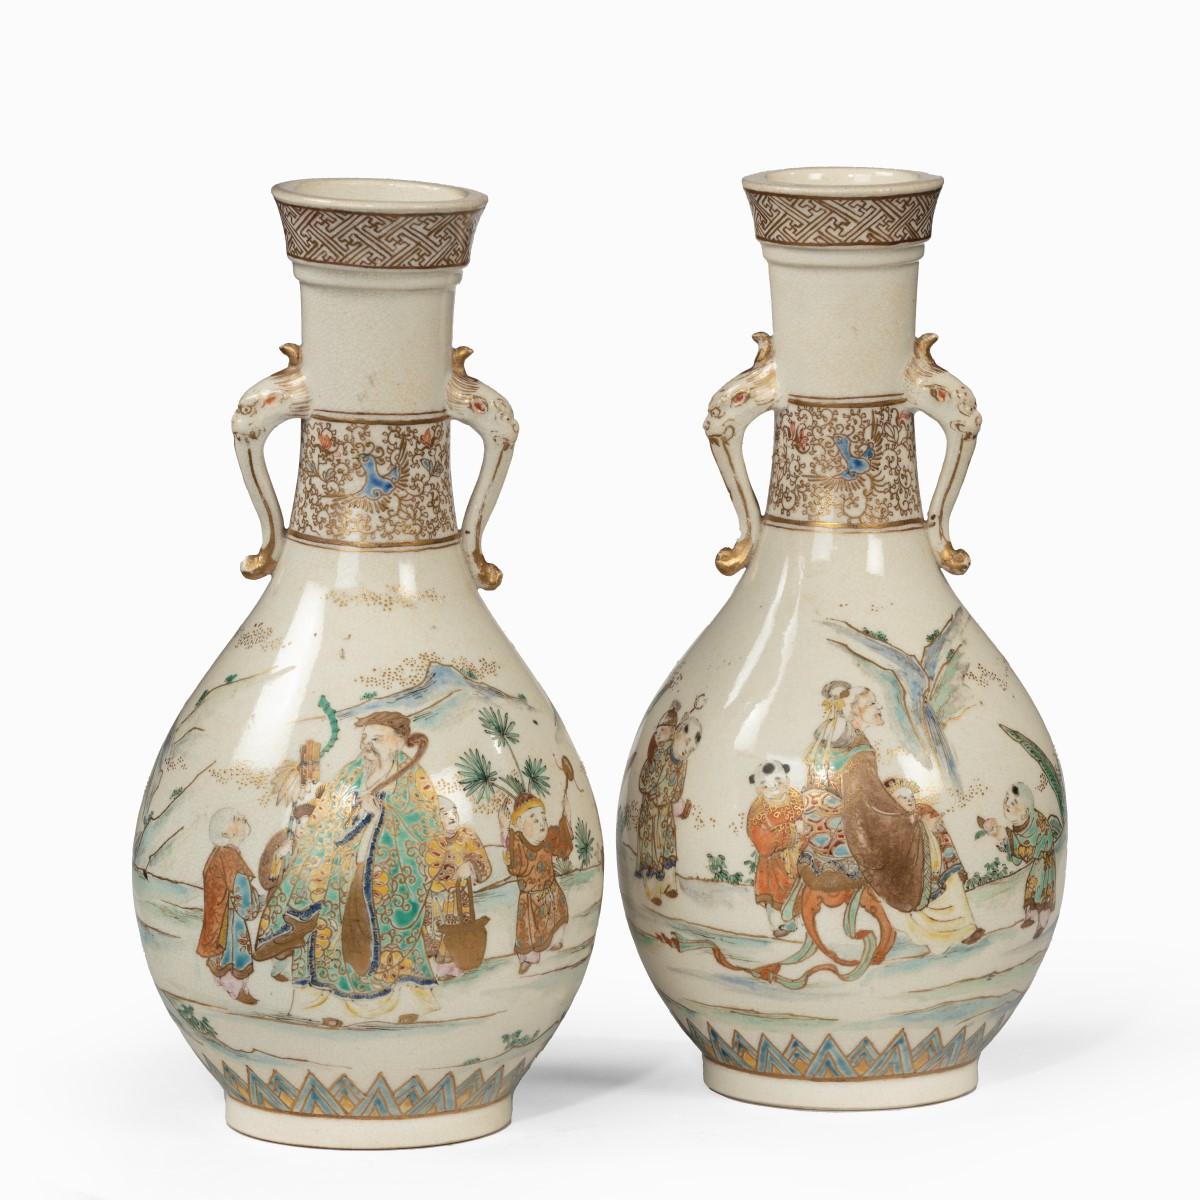 Pair of Meiji Period Satsuma Earthenware Vases In Good Condition For Sale In Lymington, Hampshire